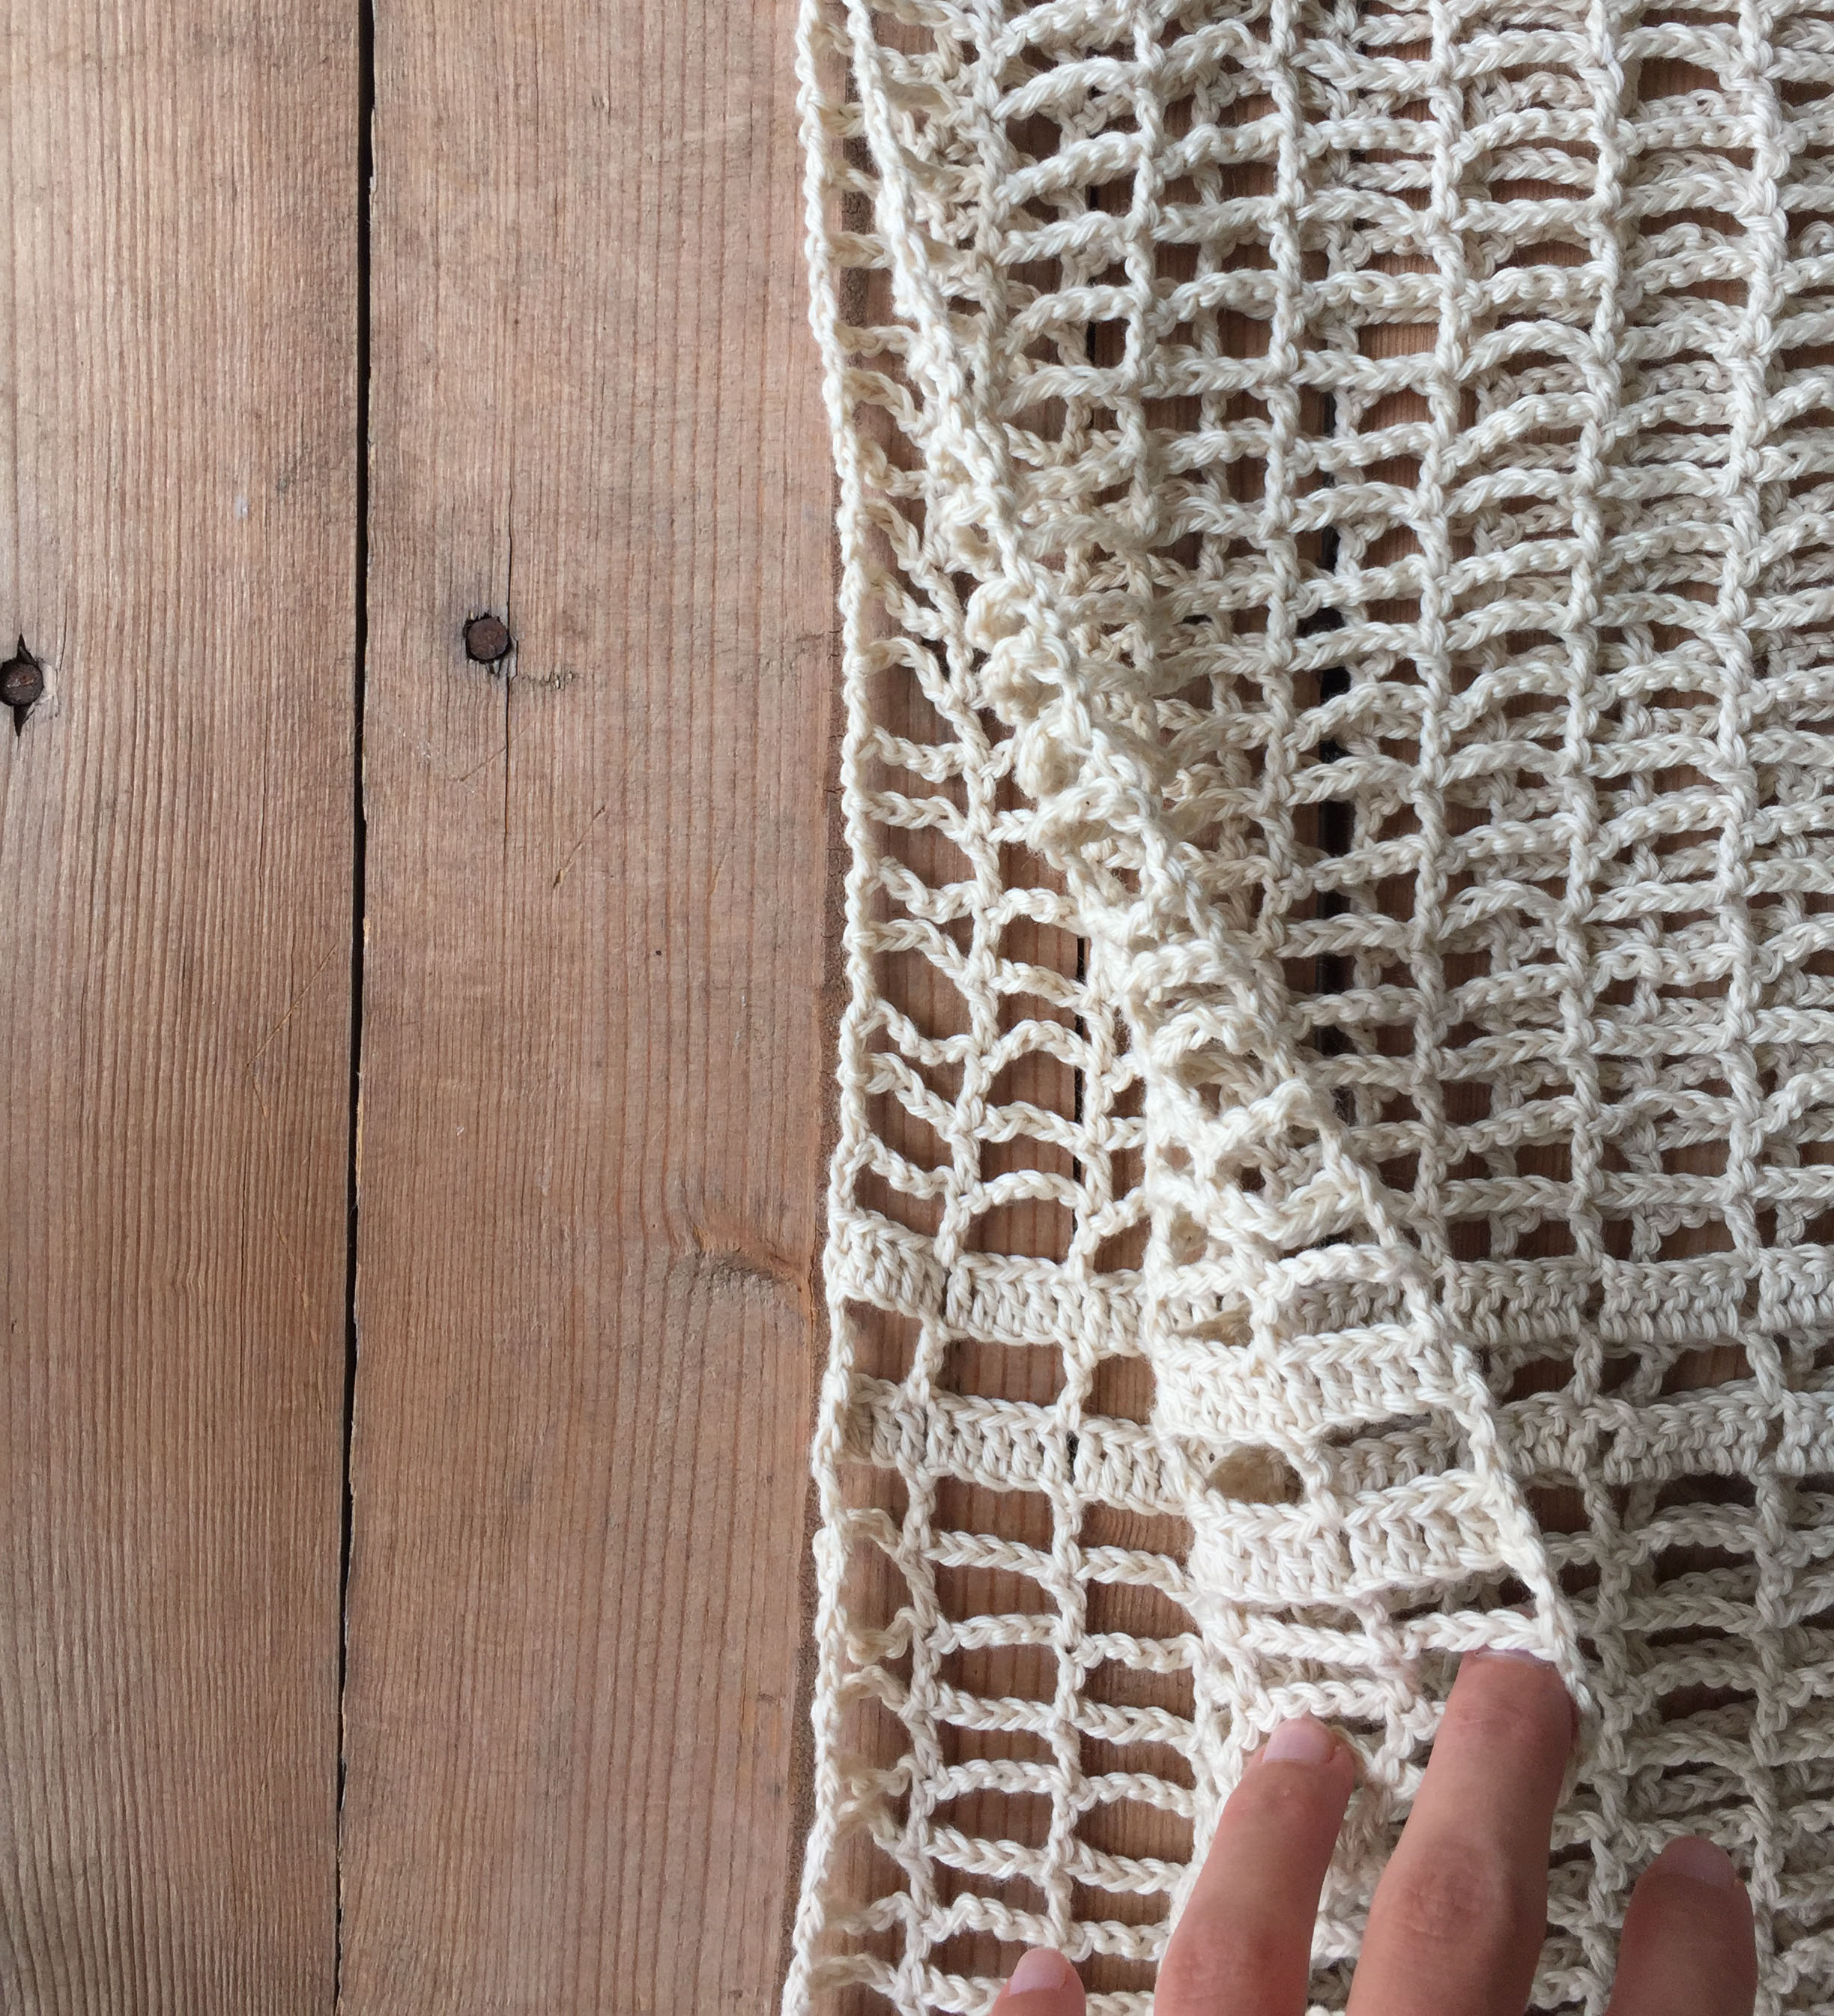 Free Crochet Pattern for the Daydreamer Crochet Vest — Megmade with Love